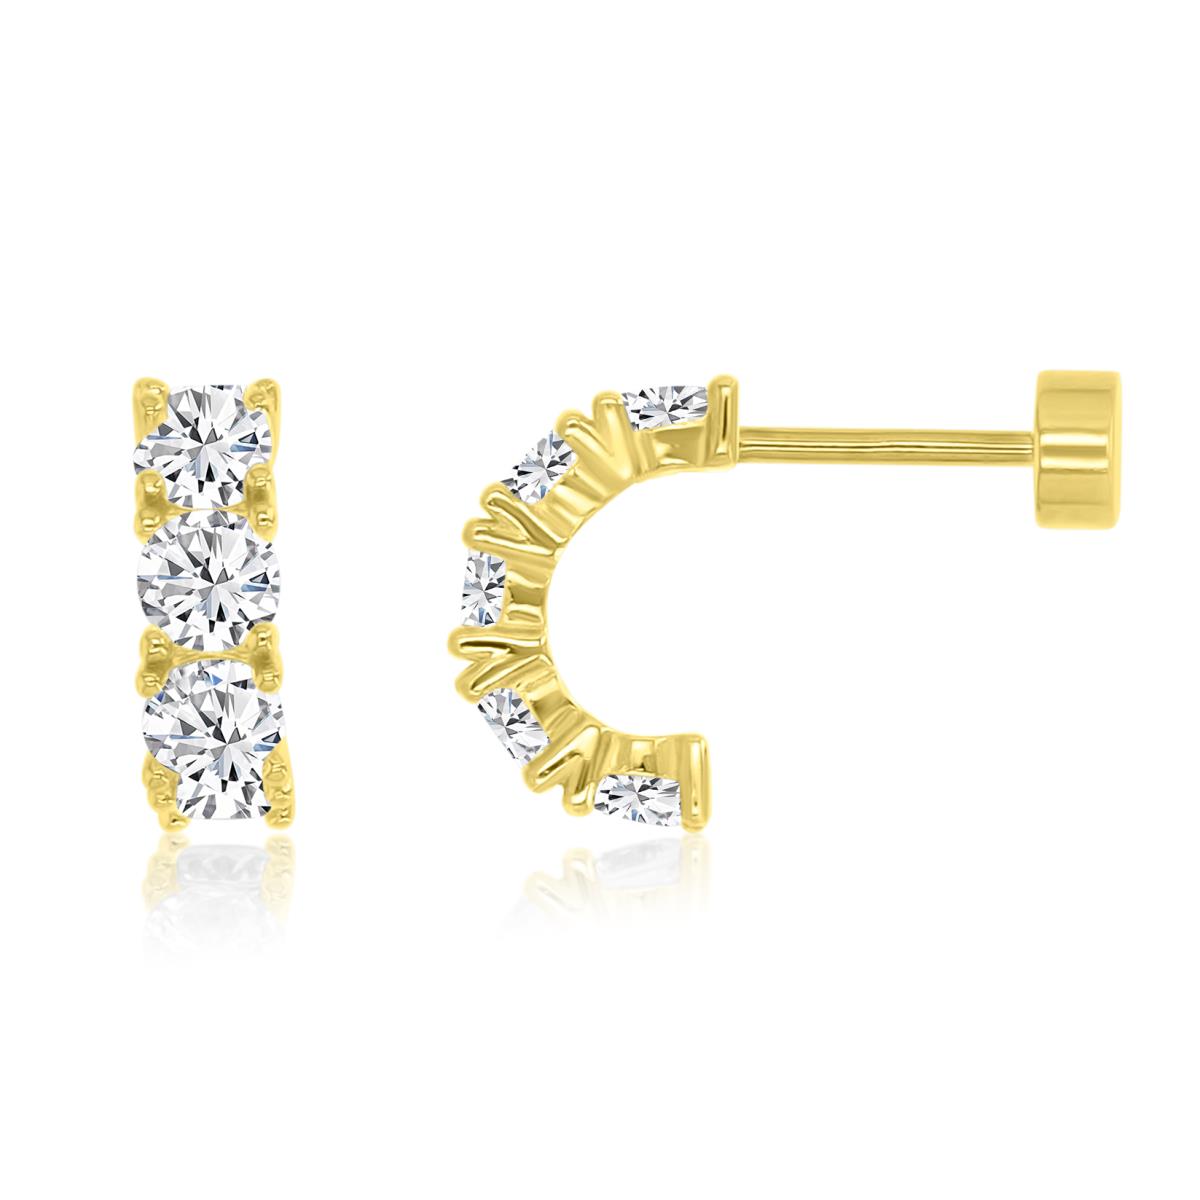 Sterling Silver Yellow 8X3 Polished White CZ Pave C Flat Back Stud Earrings